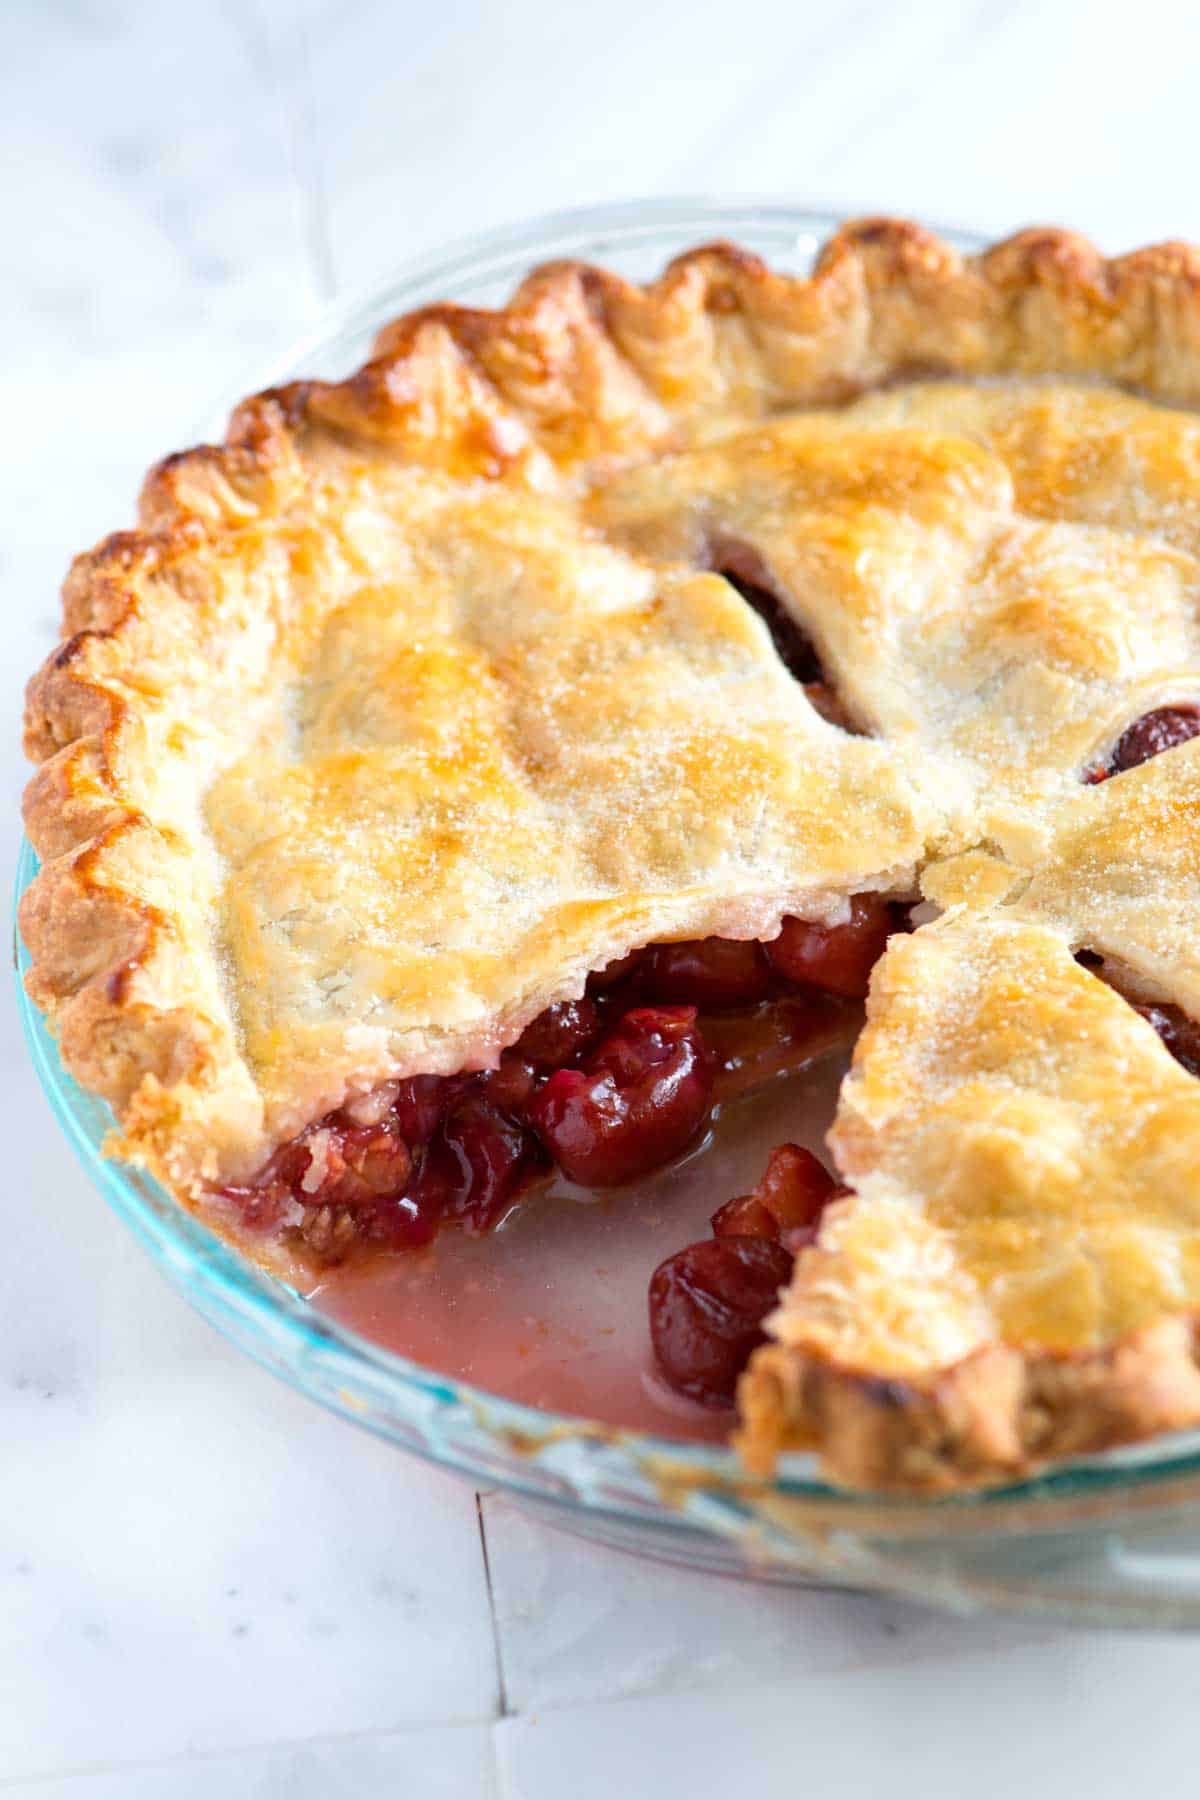 Cherry crumb pie with canned pie filling - julumk